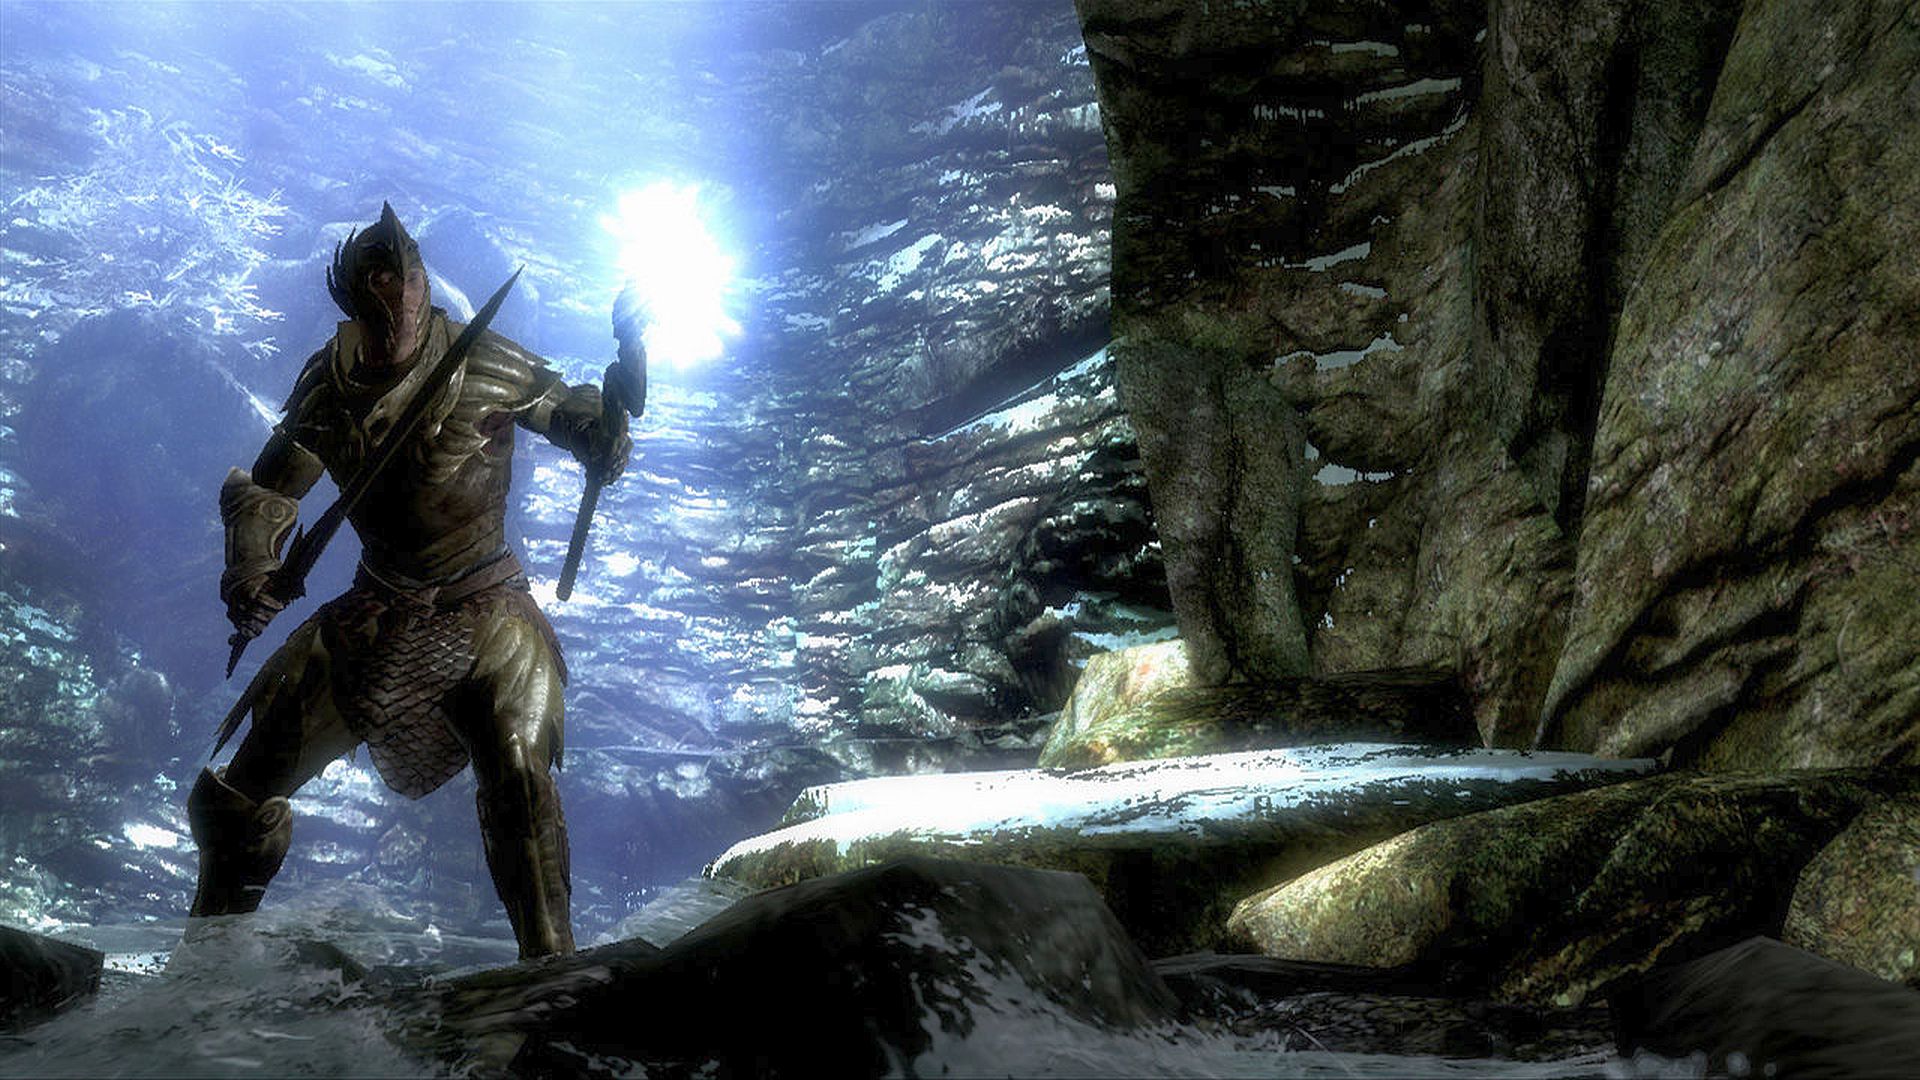 Skyrim fans are very excited about skipping the pickaxe animation